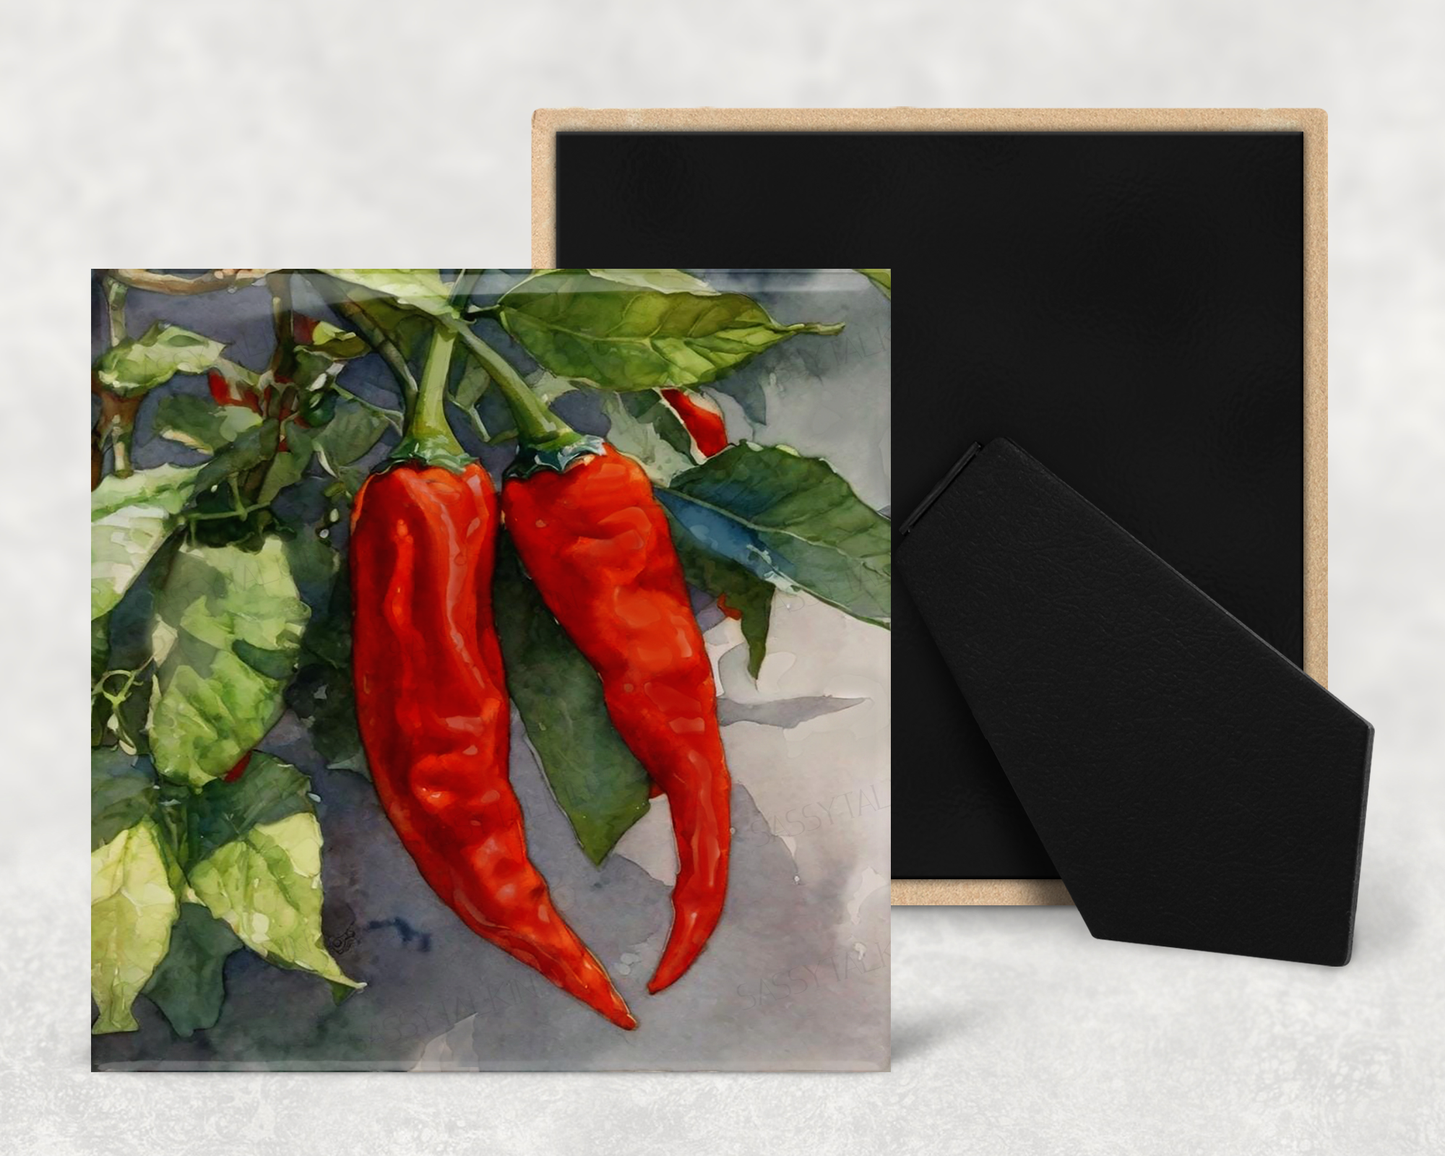 Art Tile, FV, Chili Peppers, 4"x4" or 6"x6", Ceramic, watercolor, easel back